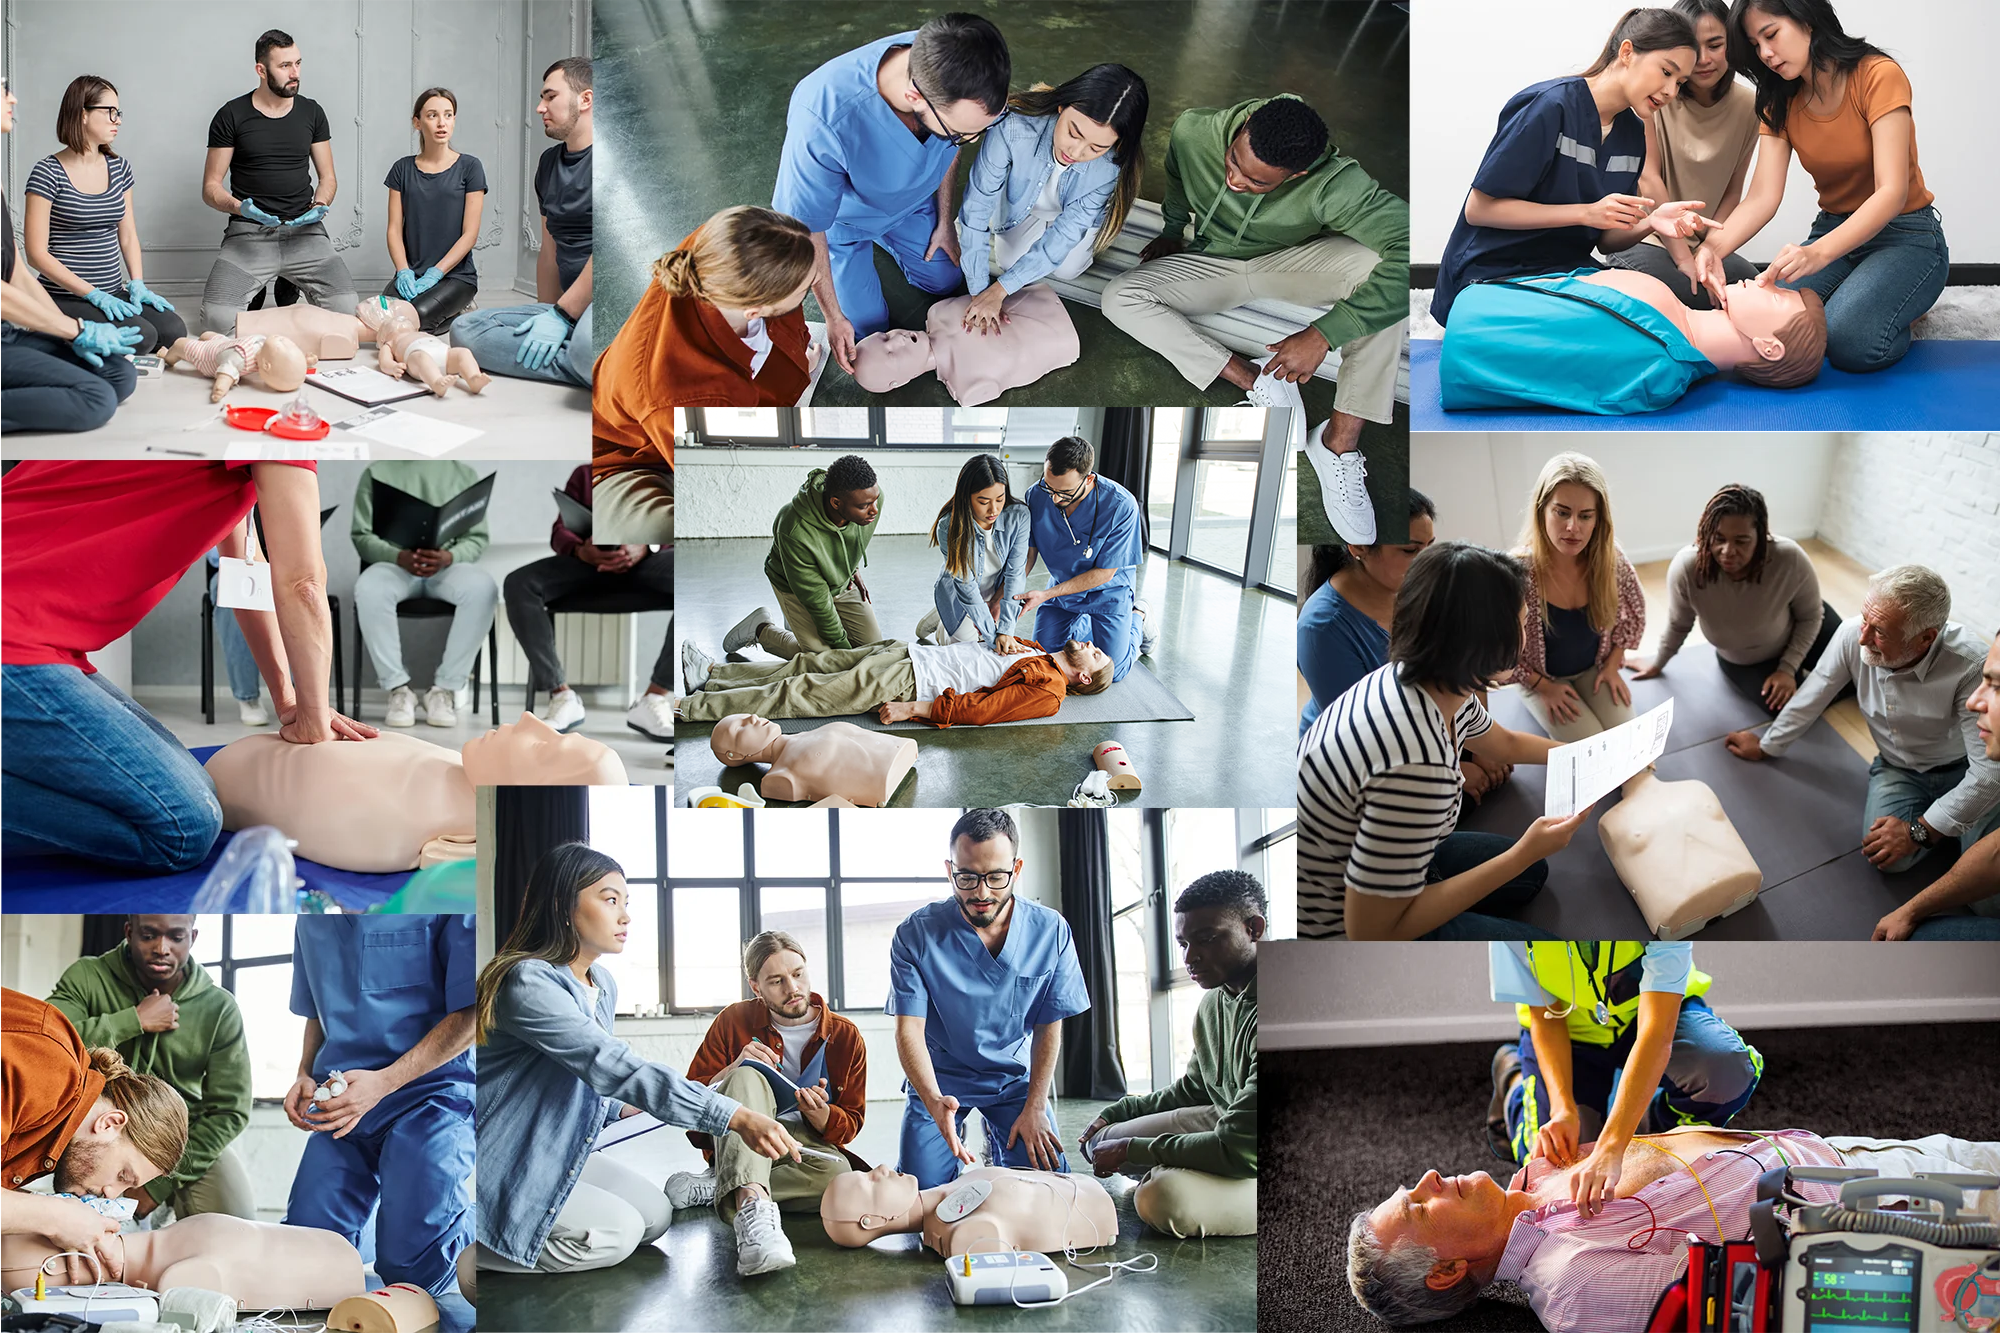 BLS & CPR Classroom Courses & Training in London - ComplyPlus LMS™ - The Mandatory Training Group UK -